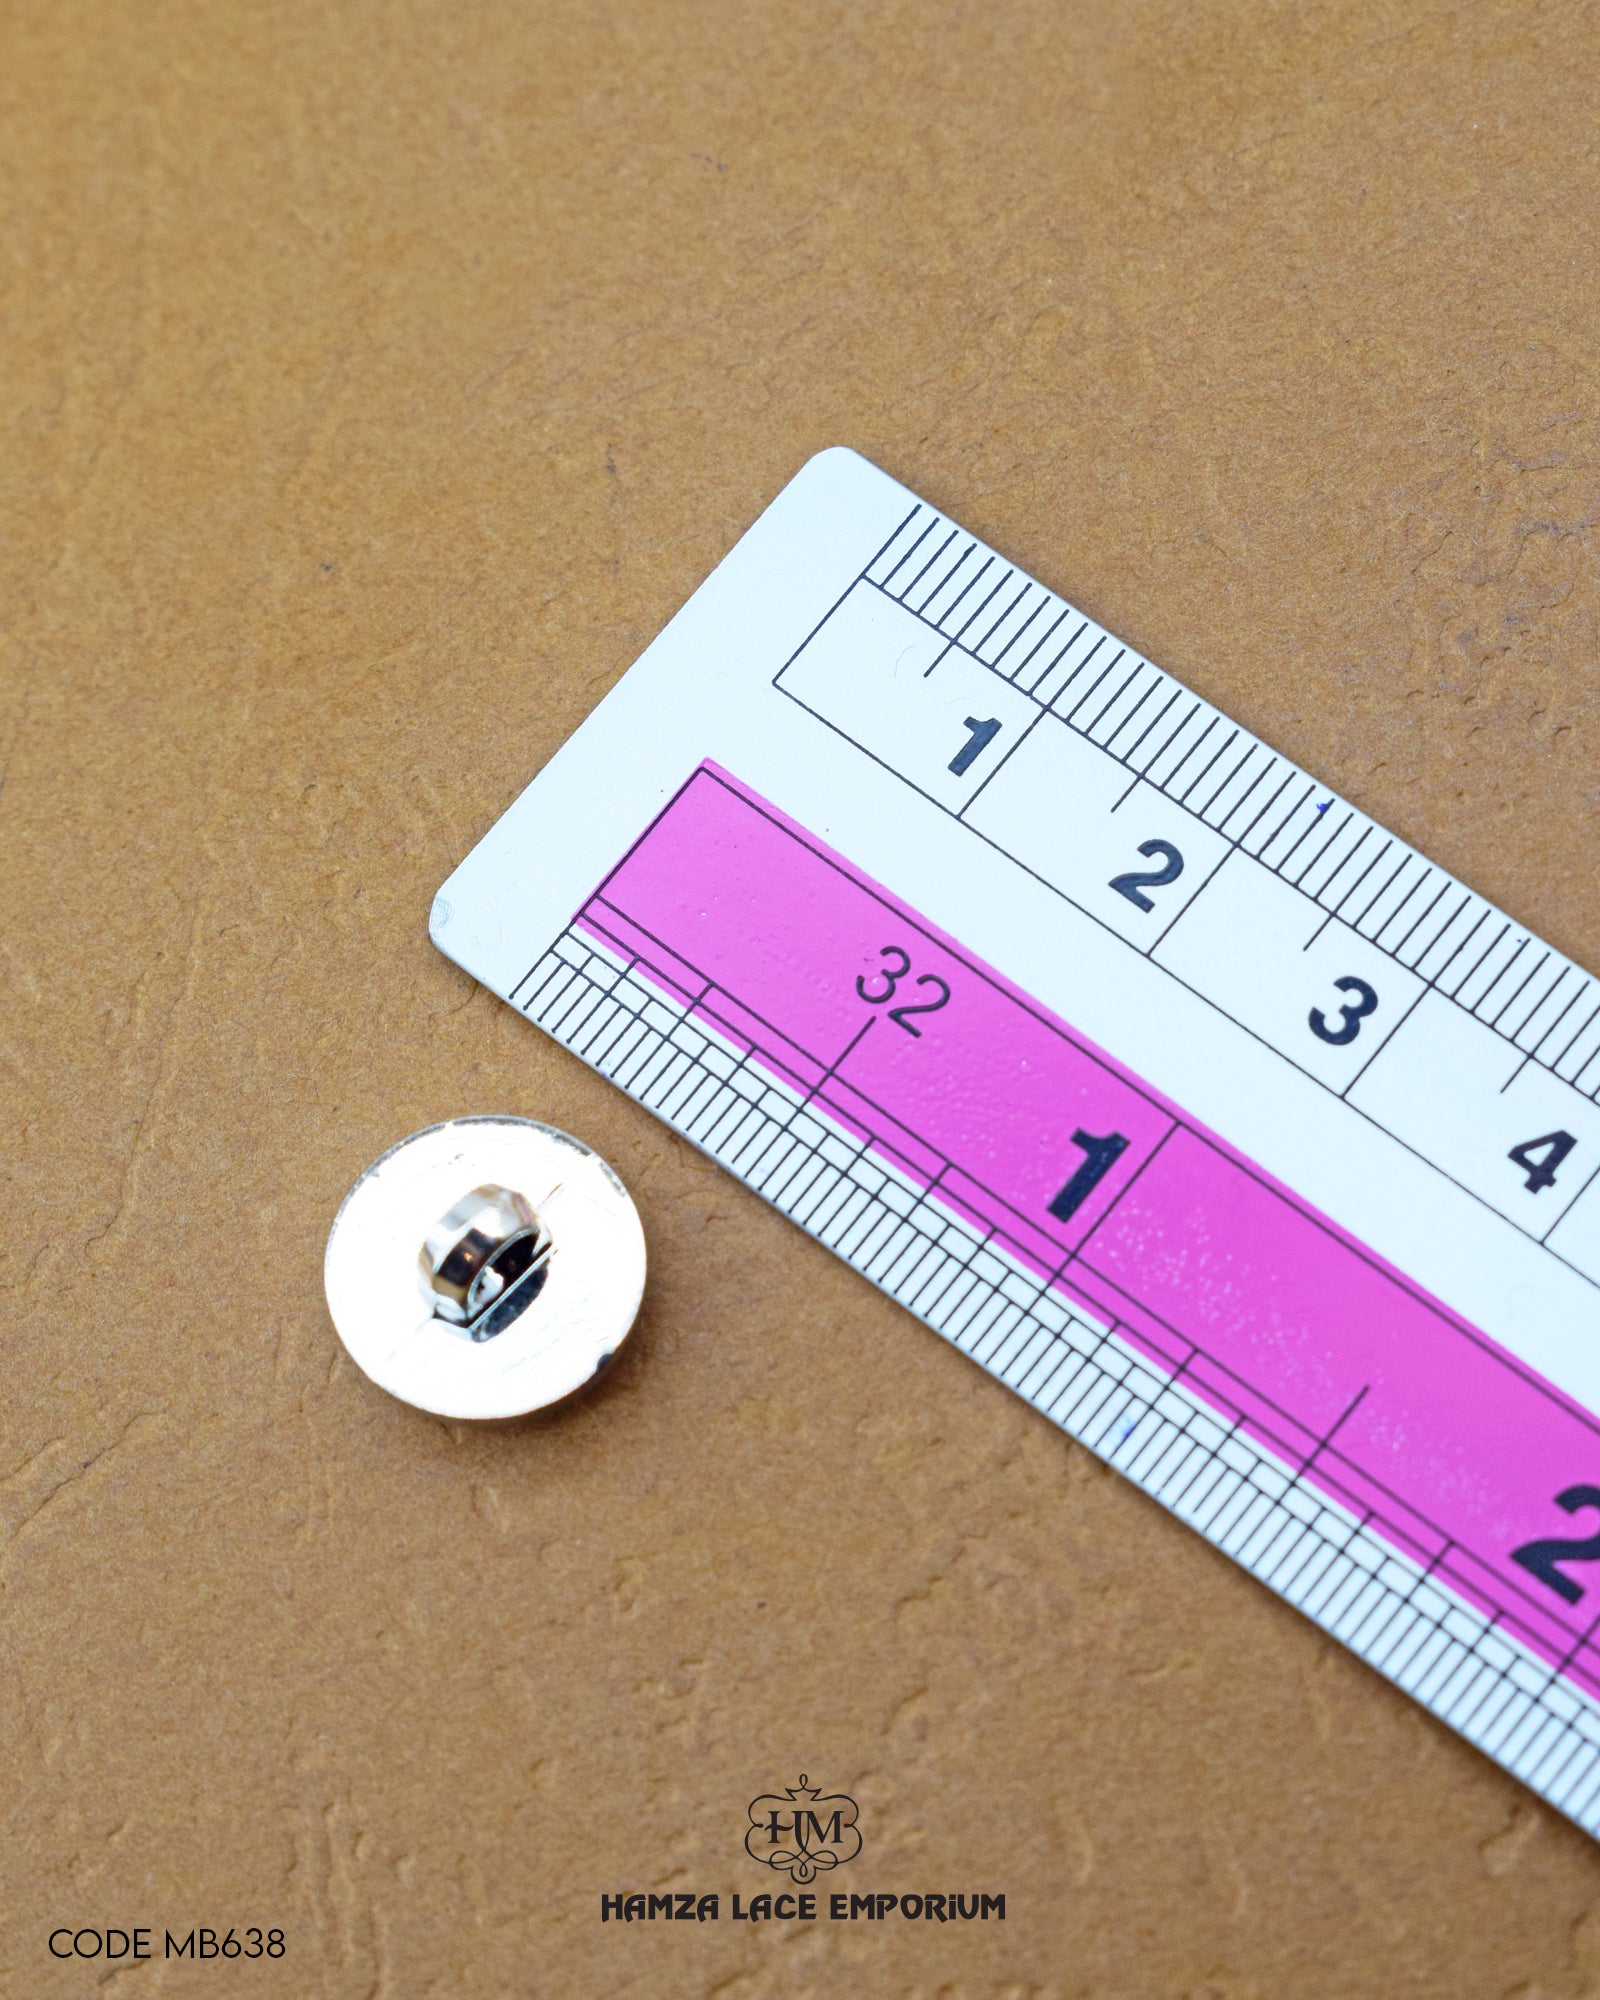 Size of the 'Metal Suiting Button MB638' is given with the help of a ruler